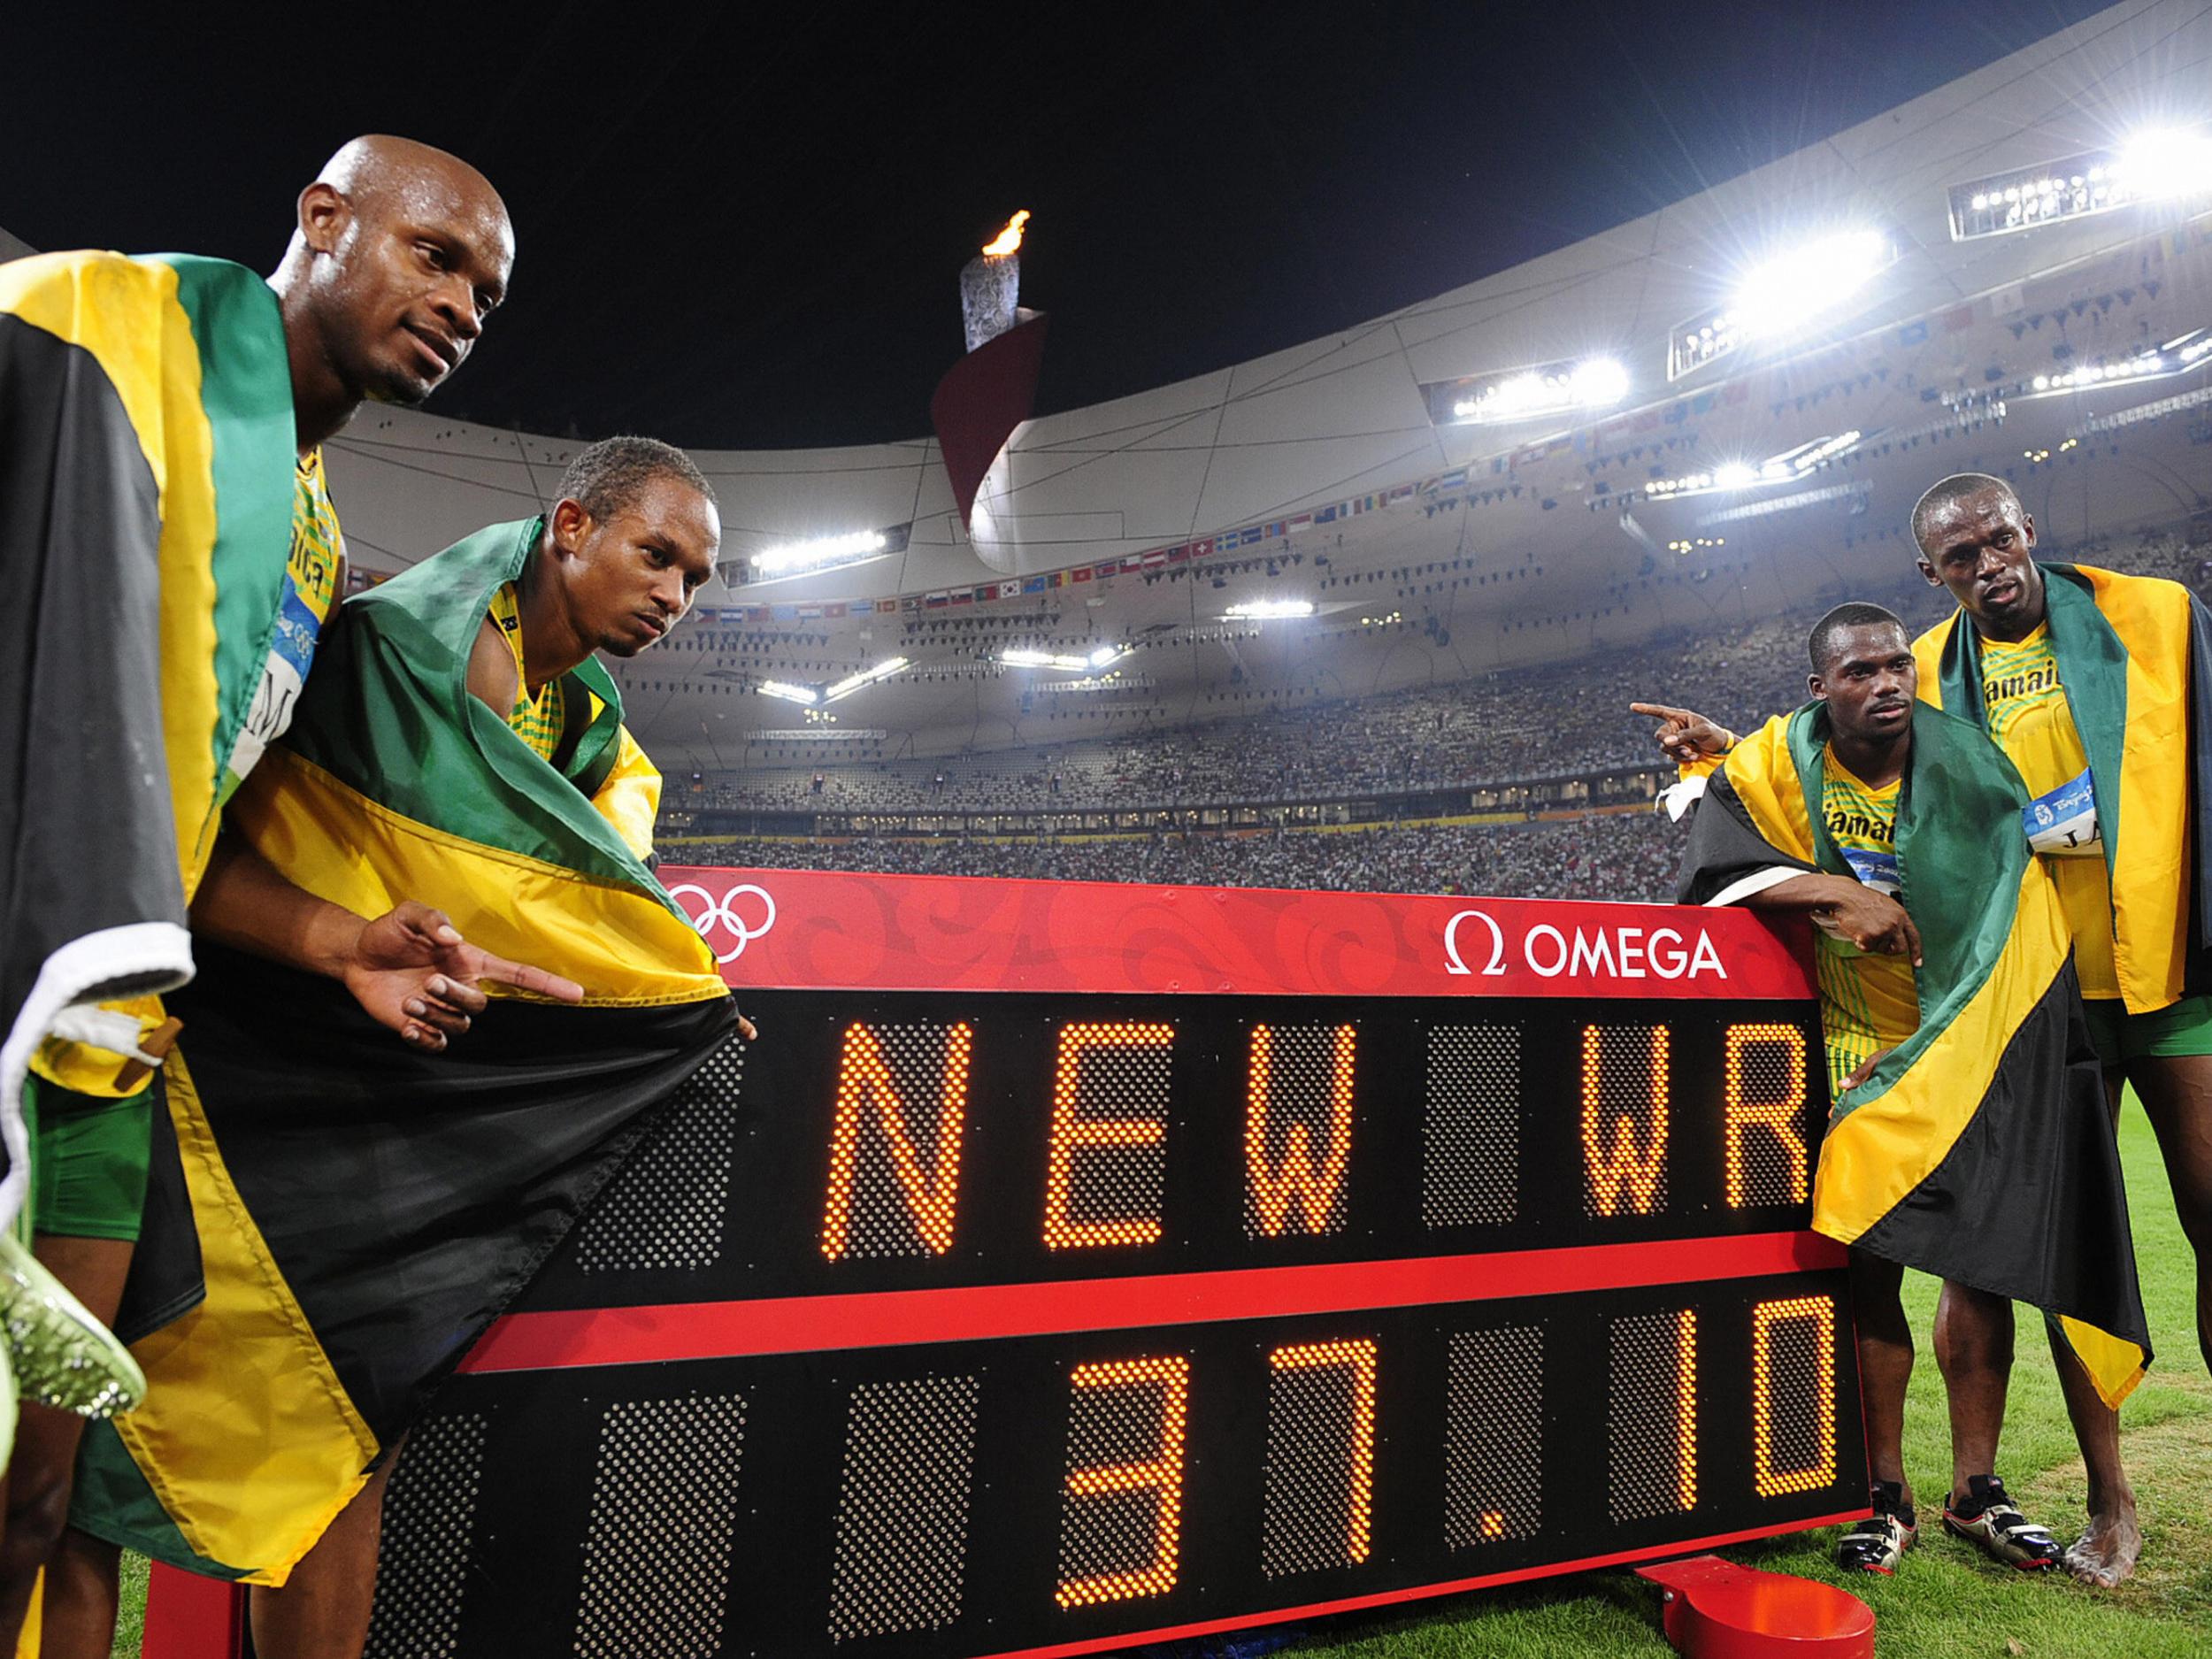 Jamaica have since set a new world record in the 4x100m event